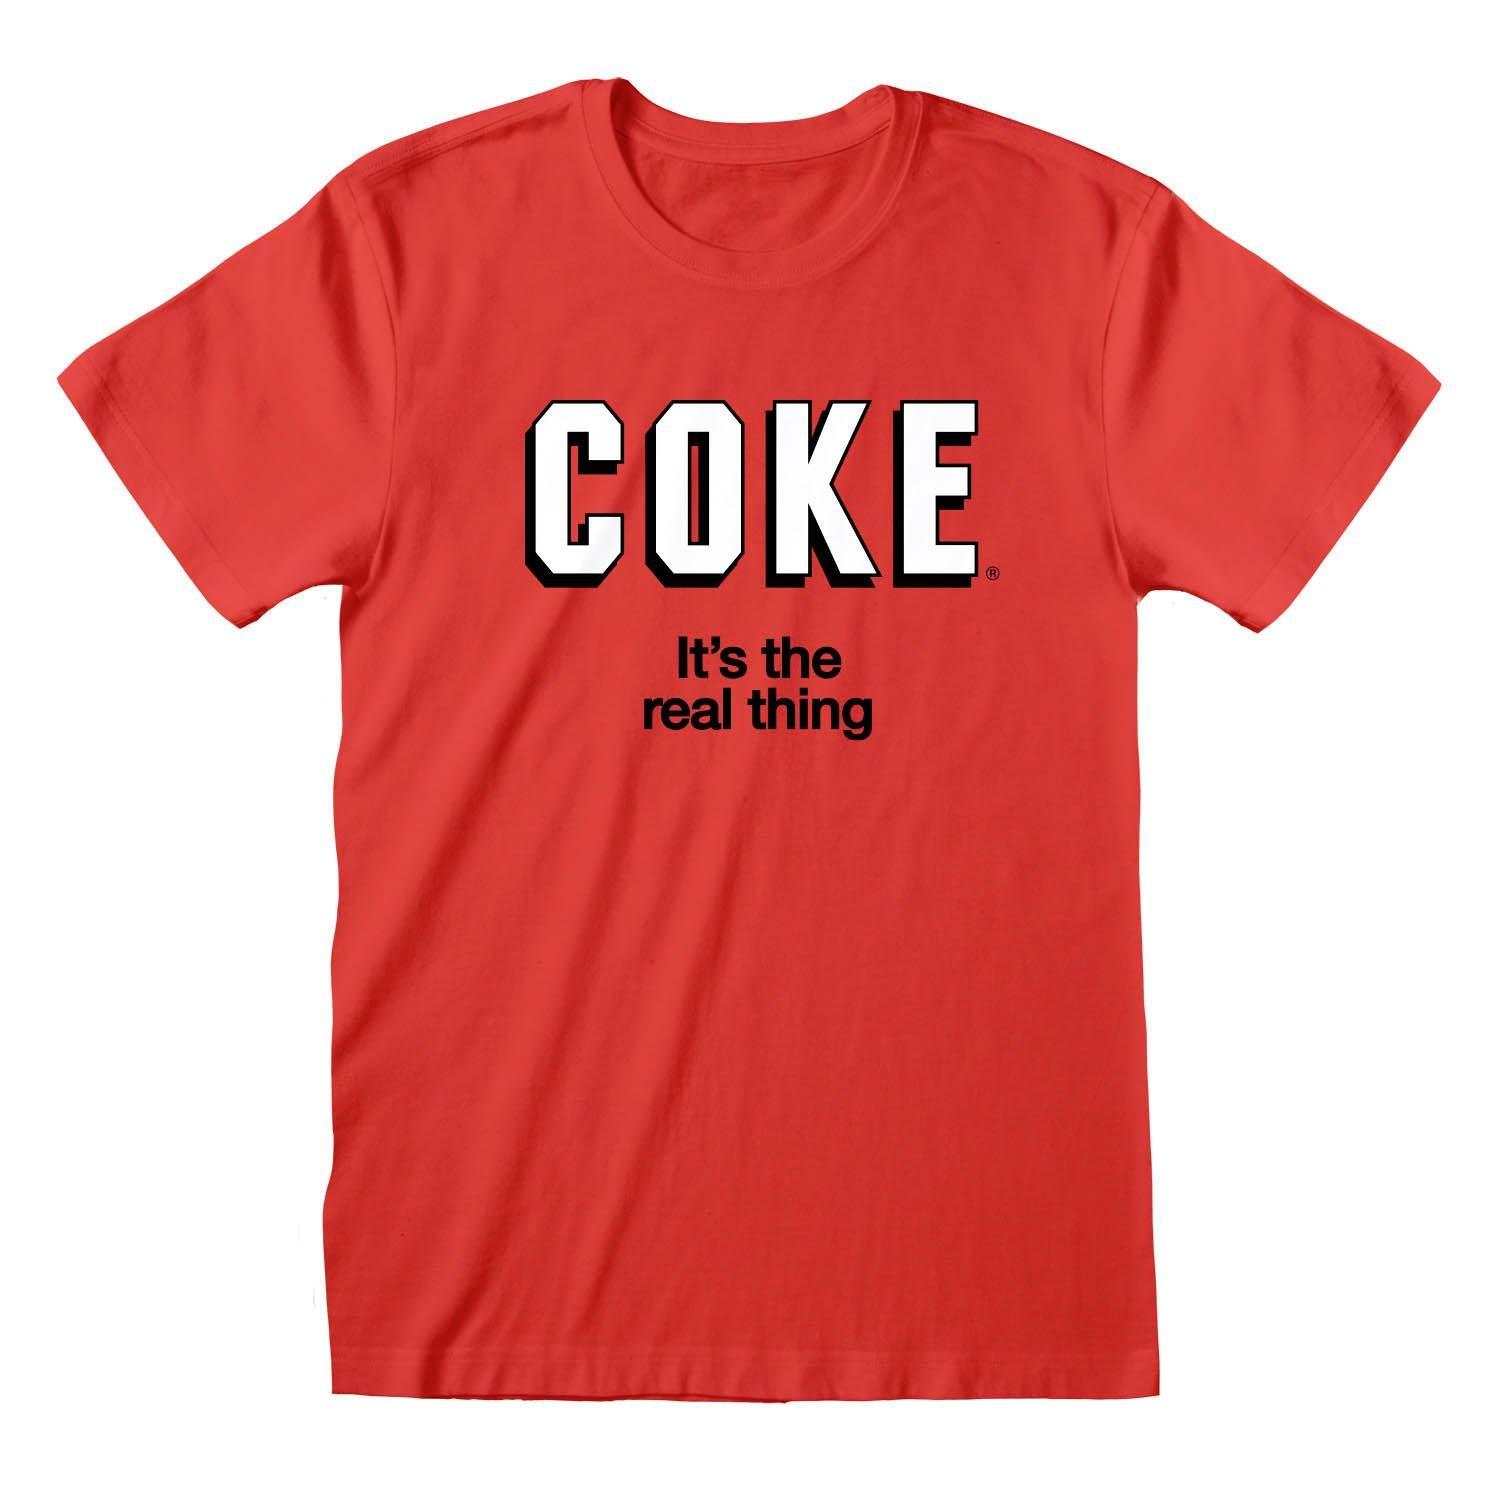 Image of Coca-Cola It's The Real Thing TShirt - XL